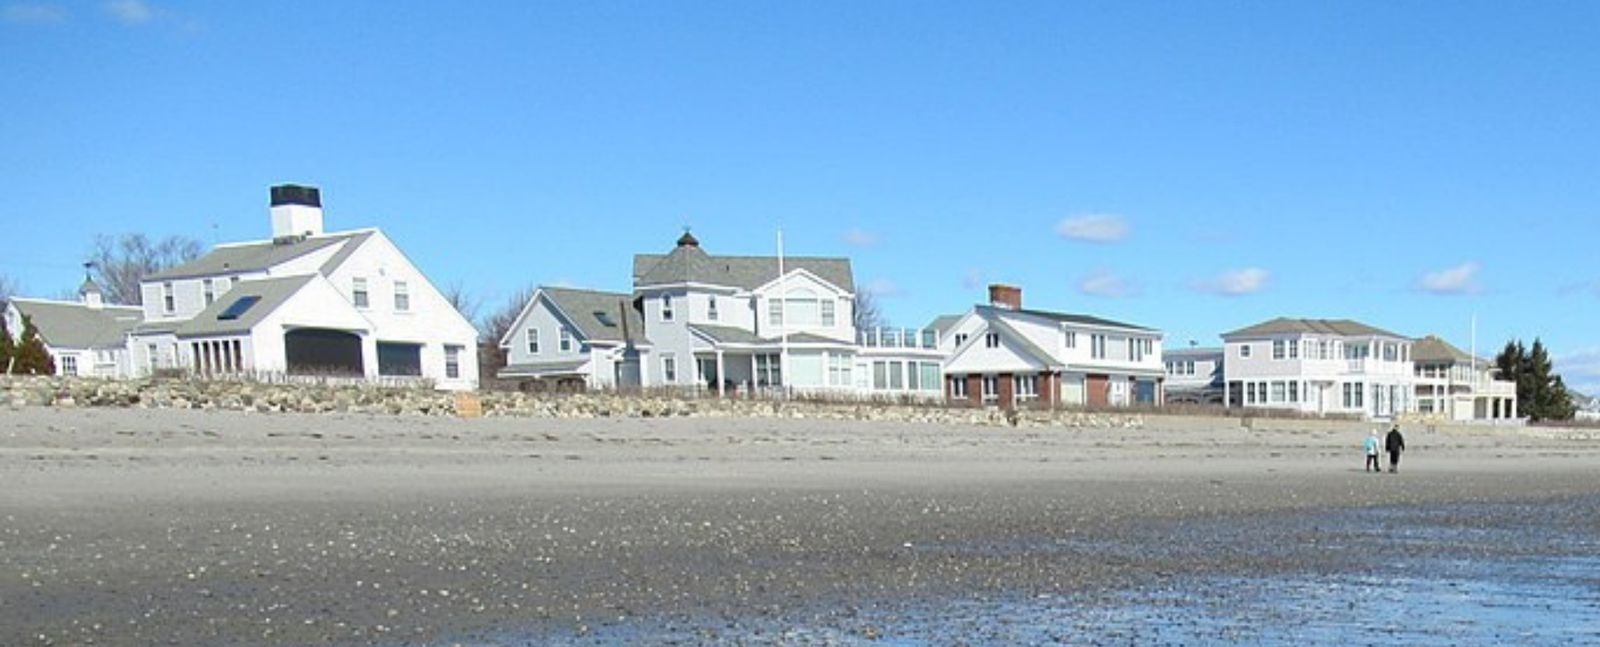 ocean front homes in new hampshire main region